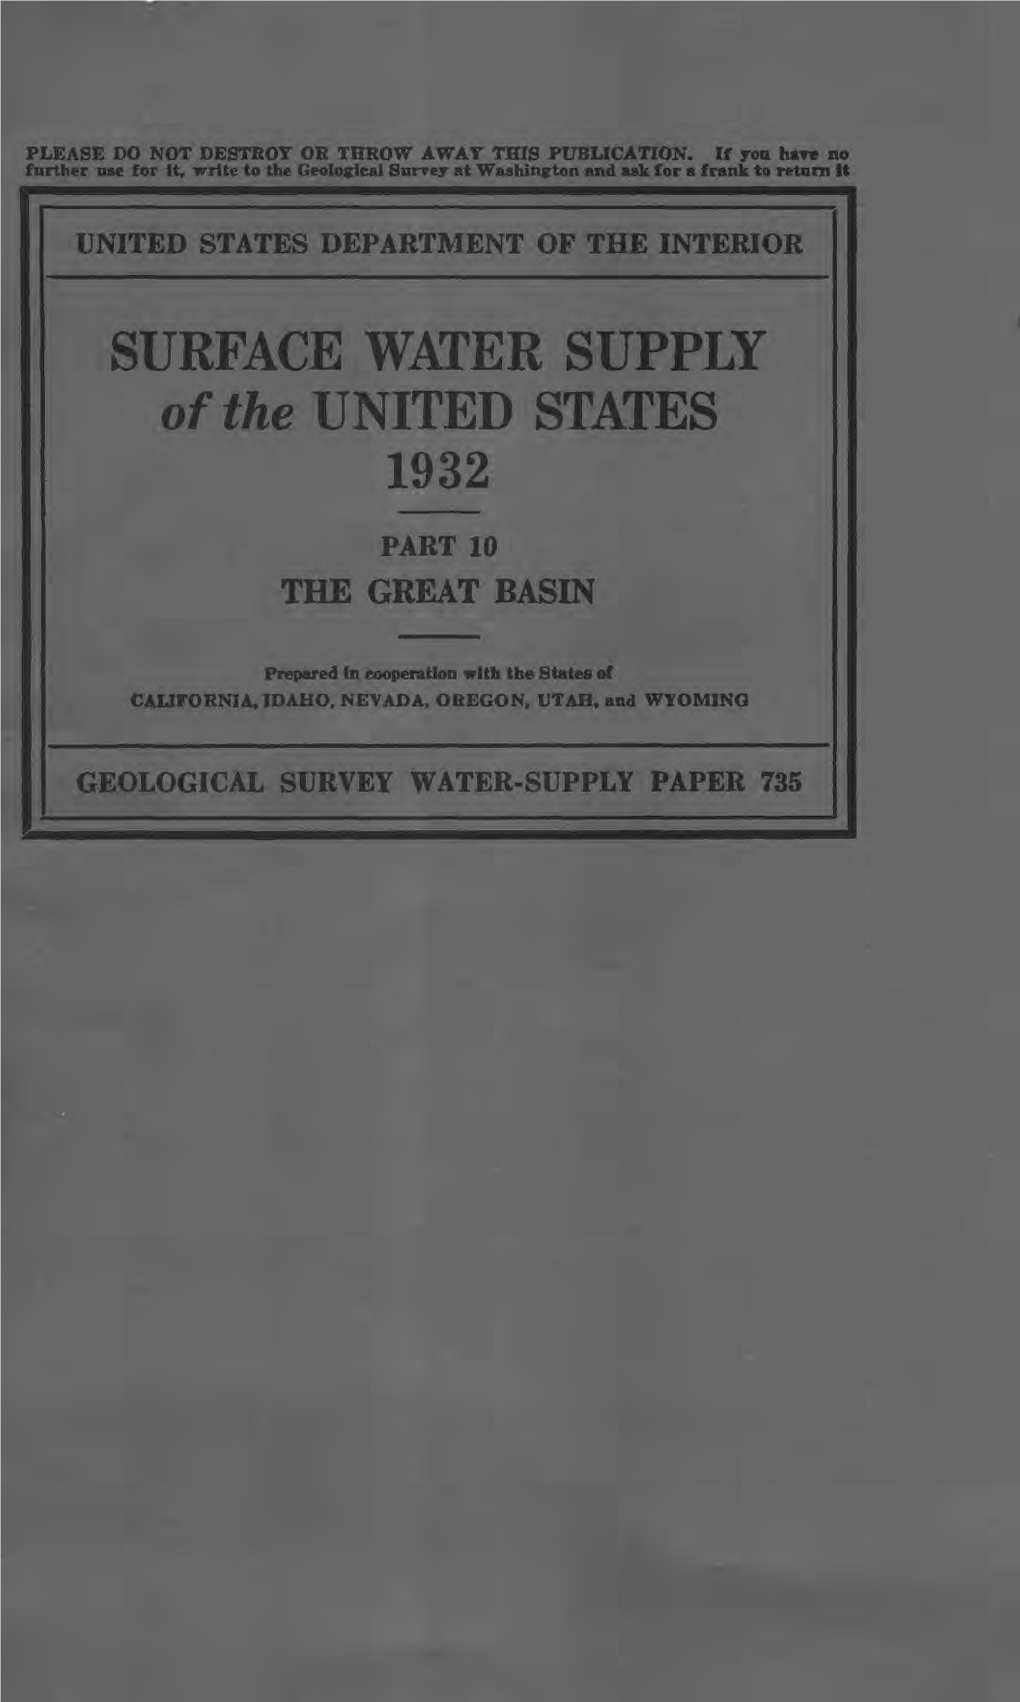 SURFACE WATER SUPPLY of the UNITED STATES 1932 PART 10 the GREAT BASIN